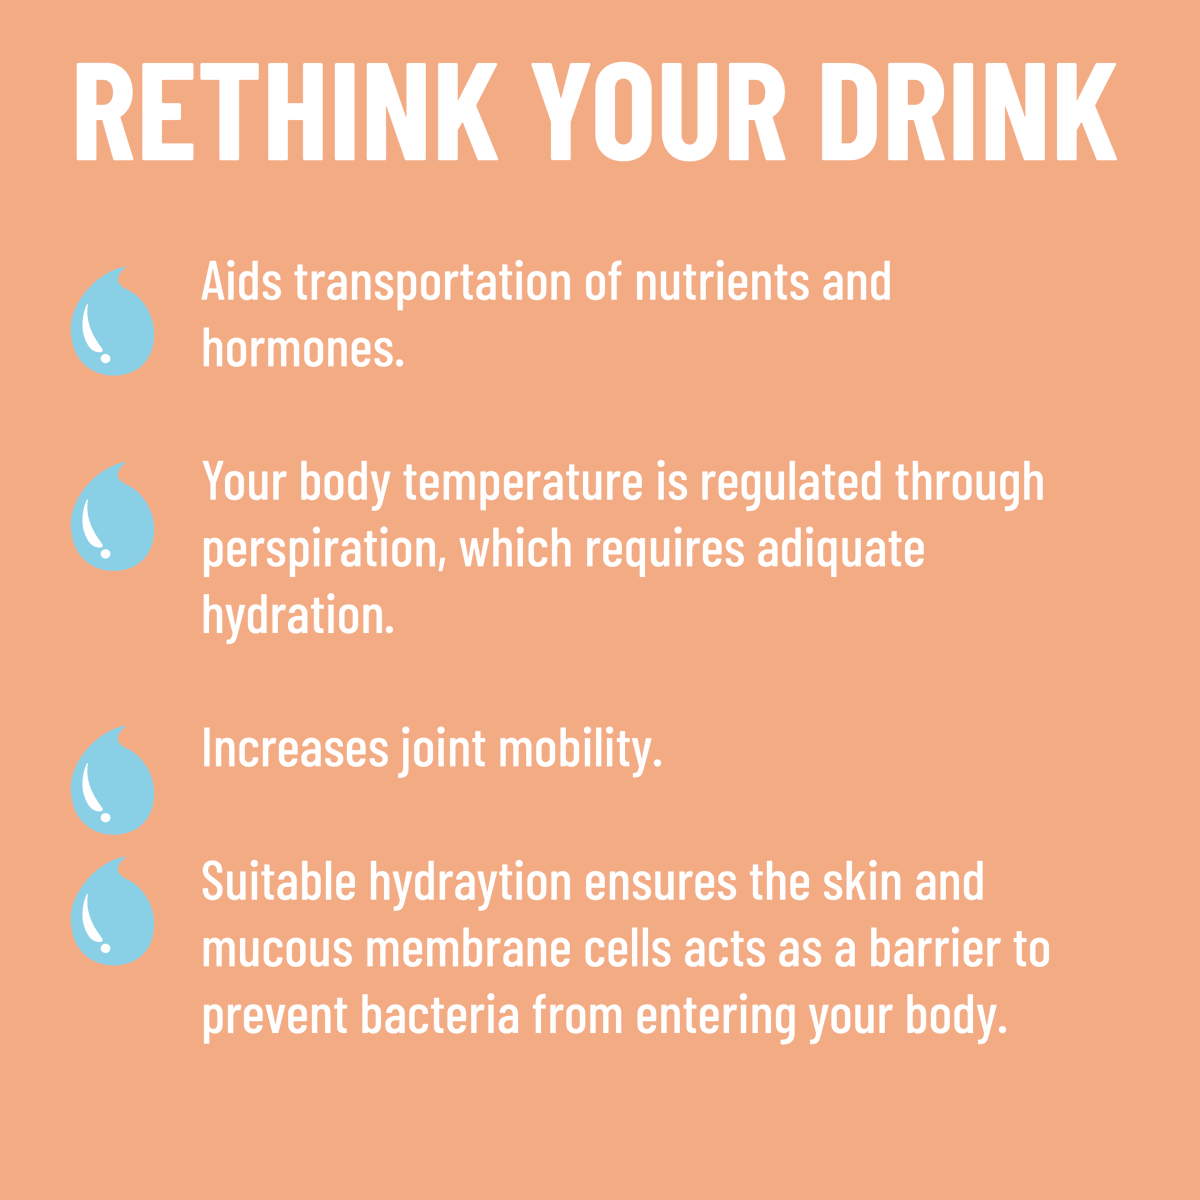 Thirsty Thursday!
A typical adult loses approximately 2.6L of water a day, so it's time to re-think your drink and aim to drink between 6-8 cups of water each day!

#hydration #nutritionandhydrationweeek #NHWeek #rethinkyourdrink #water #thirstythursday #healthfacts